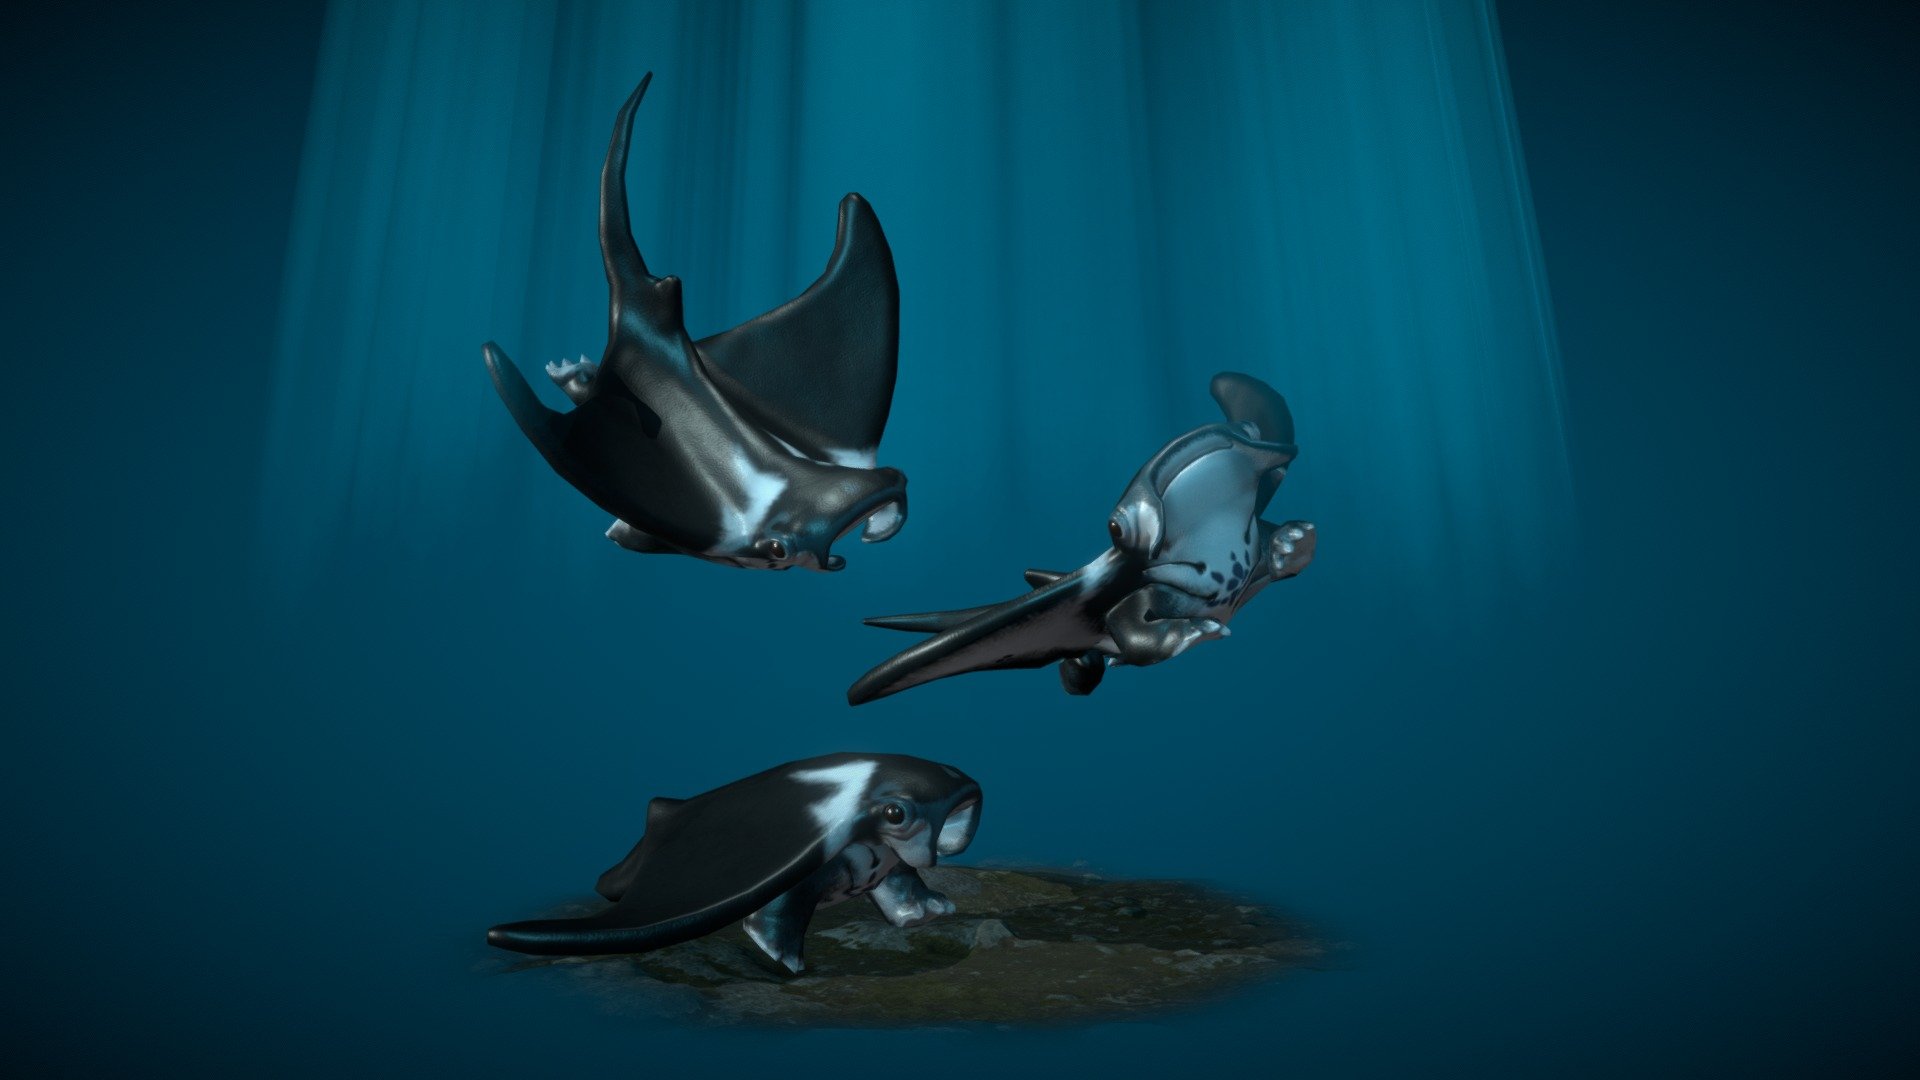 This is my submission for the #tinycreaturechallenge hosted by Jonah Lobe and Sketchfab.

Click here for the tehcnical breakdown

These are the actual true form of baby manta rays. They are able to walk on land to explore it while young before their lungs become fully developped for underwater life. As they become bigger and more majestic they return back to the open seas and they also lose their legs and become the manta rays as you know 3d model